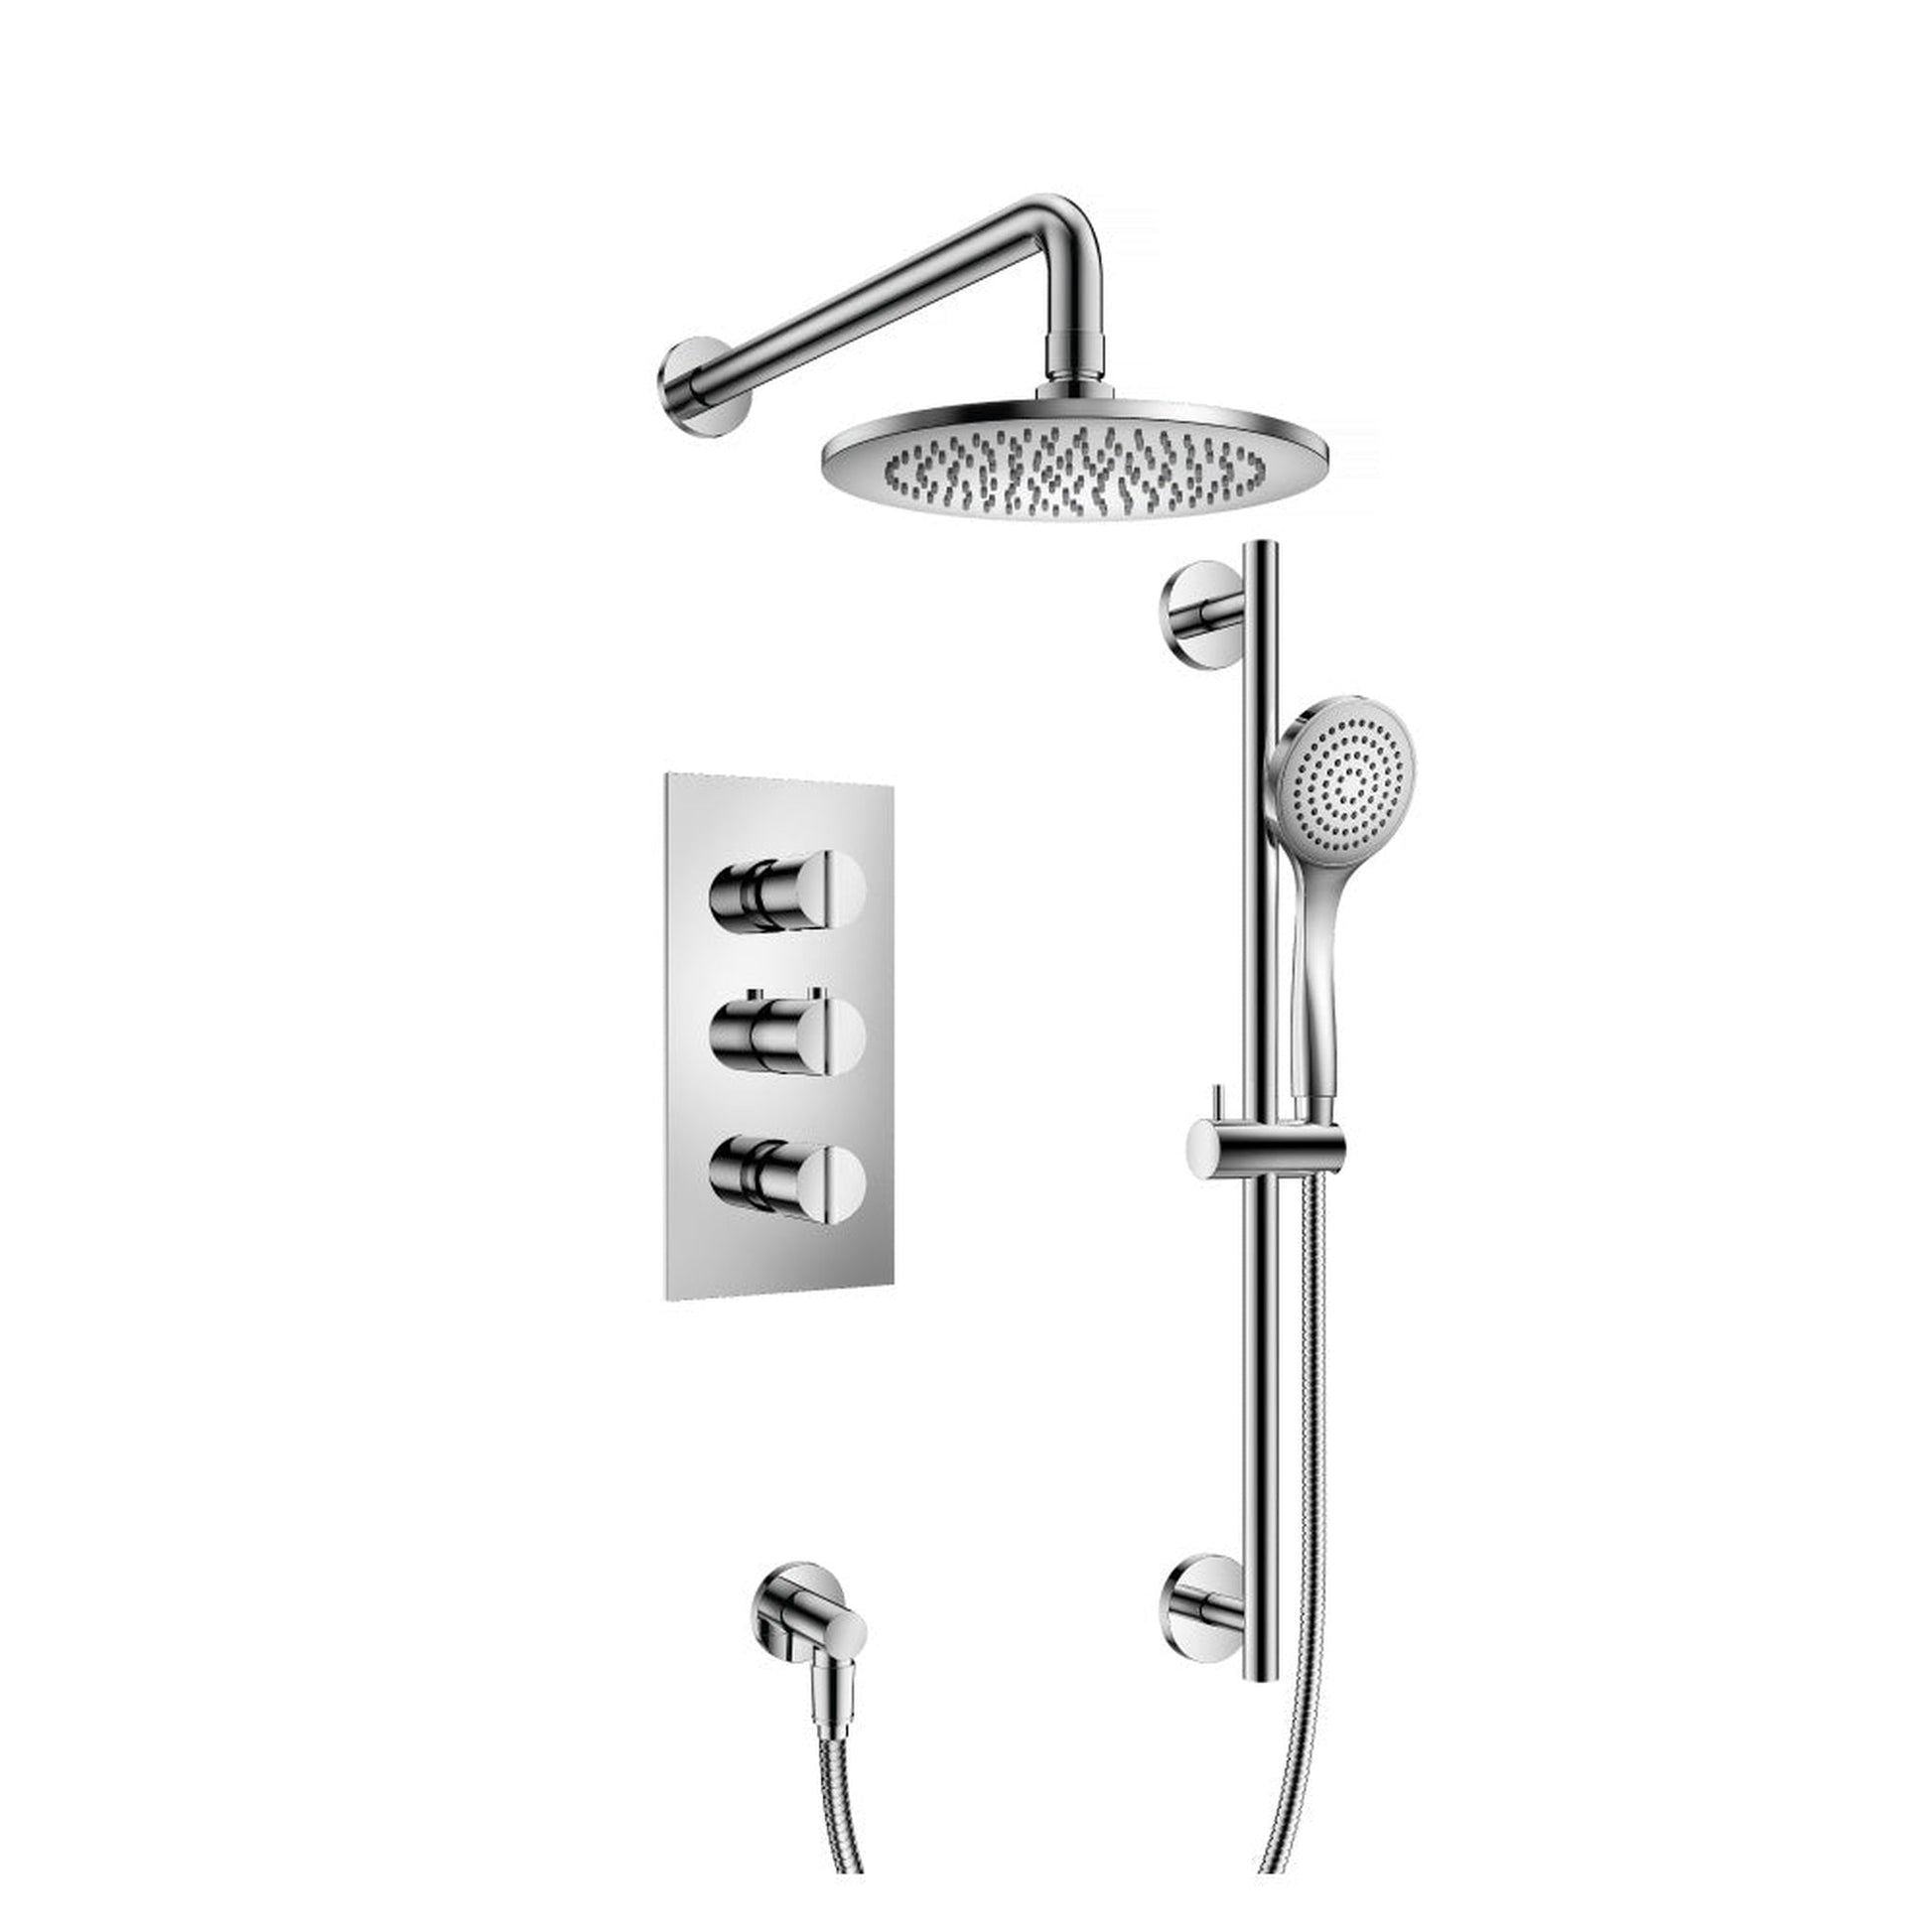 Isenberg Serie 145 Two Output Shower Set With Shower Head, Hand Held and Slide Bar in Chrome (145.7200CP)